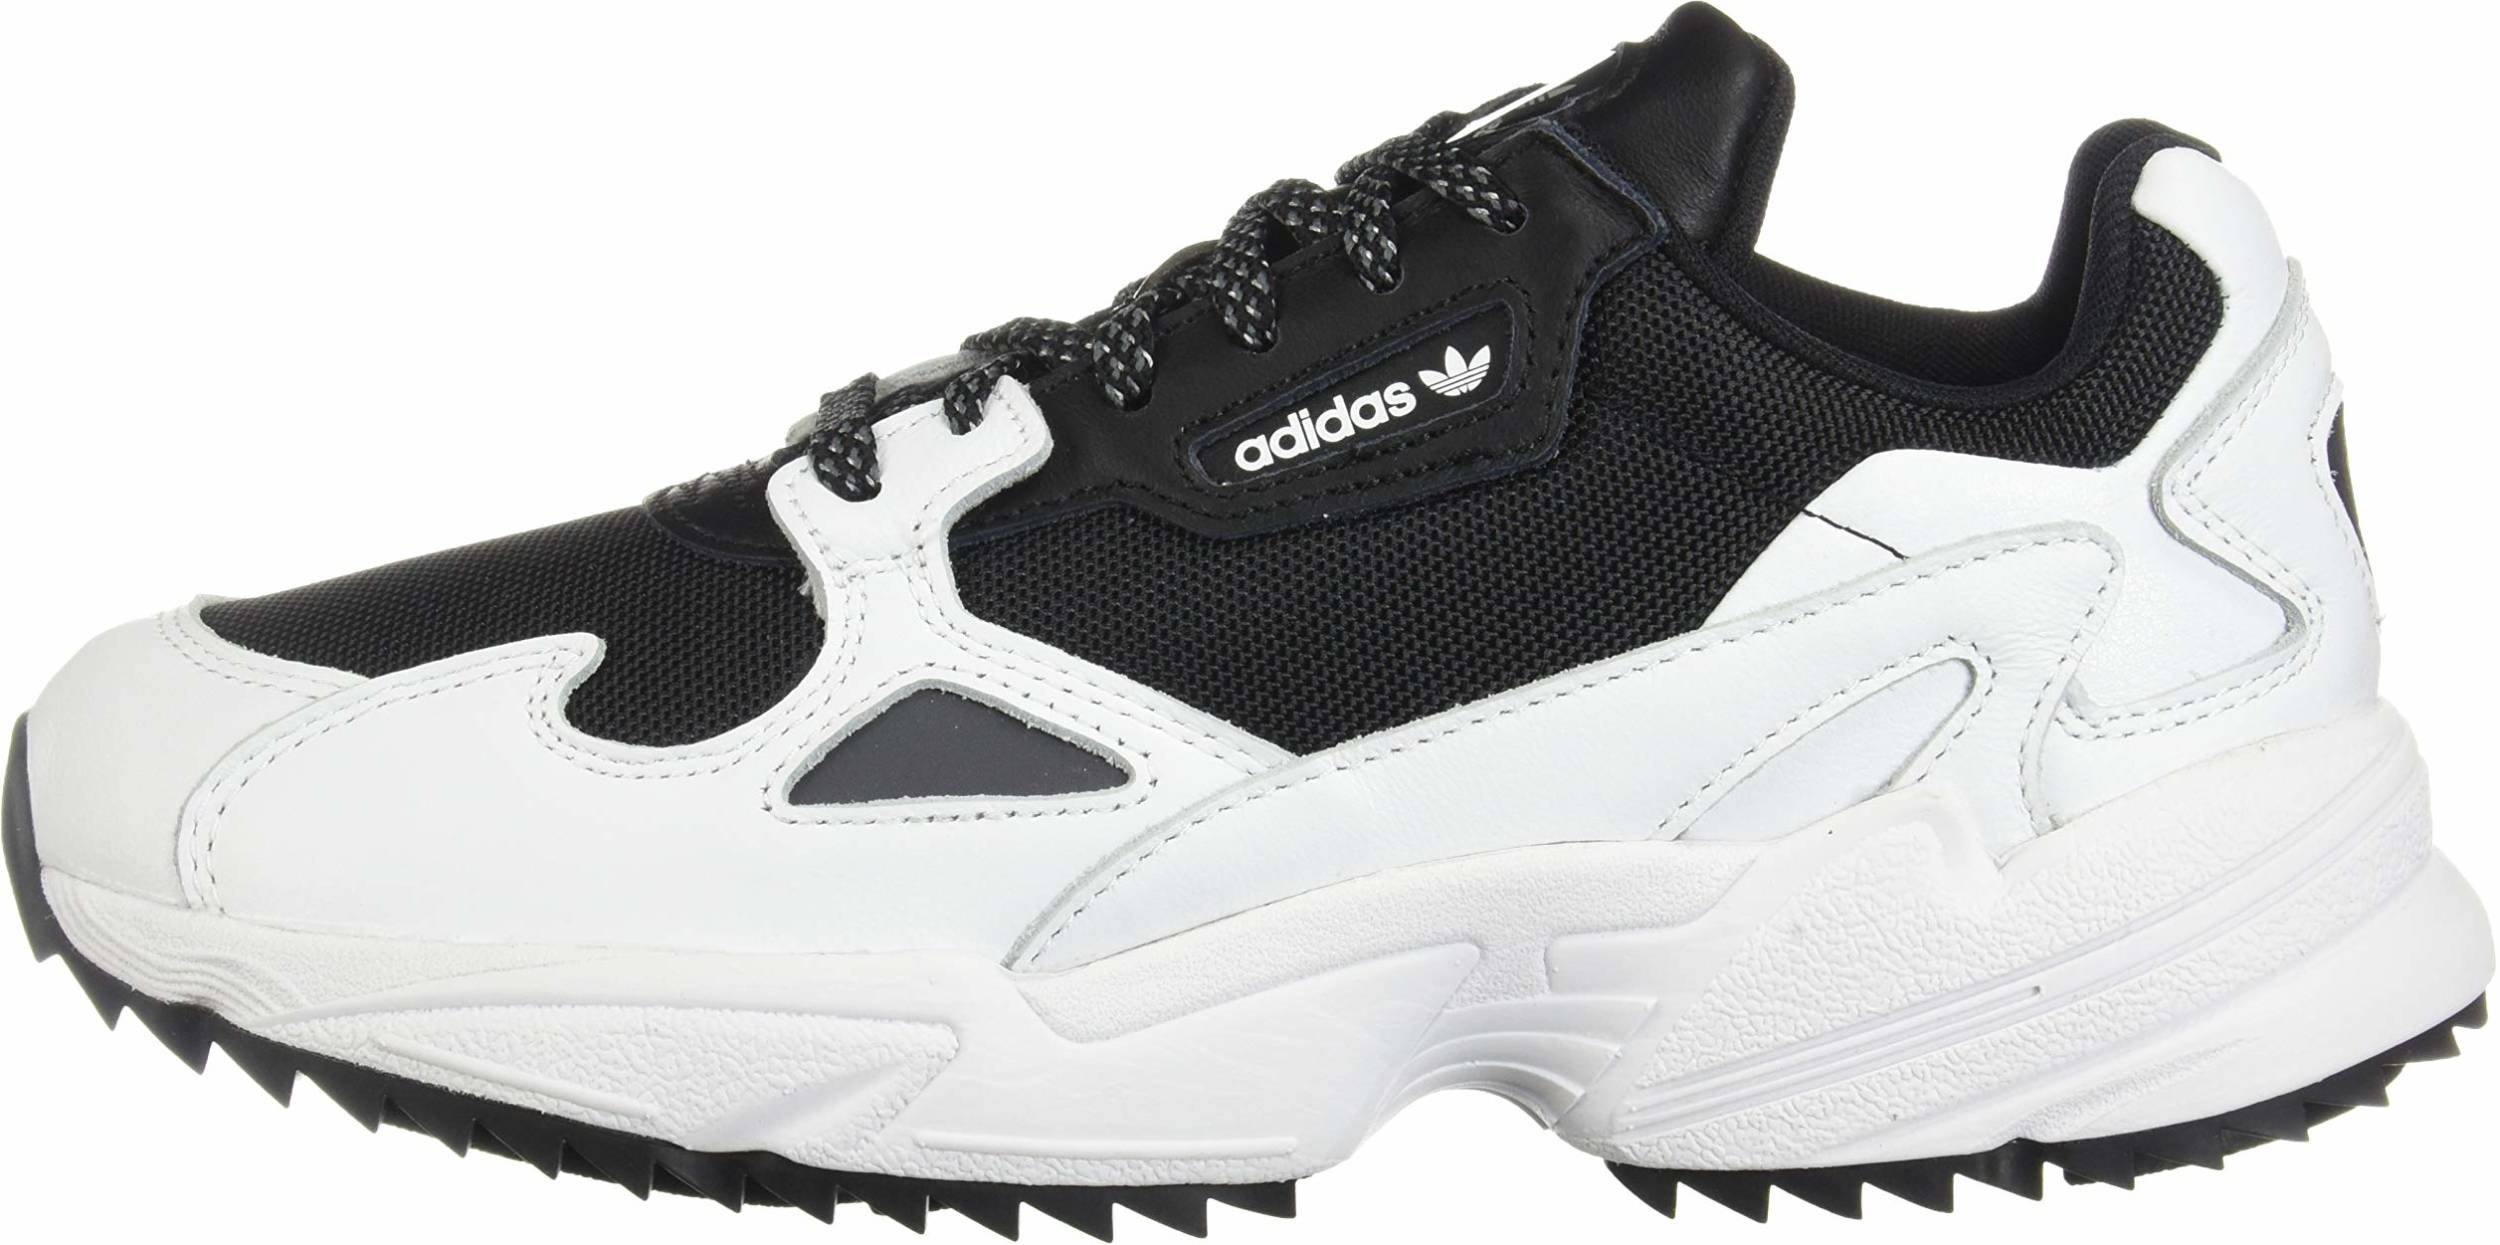 Adidas Falcon Trail sneakers in black (only $64) | RunRepeat